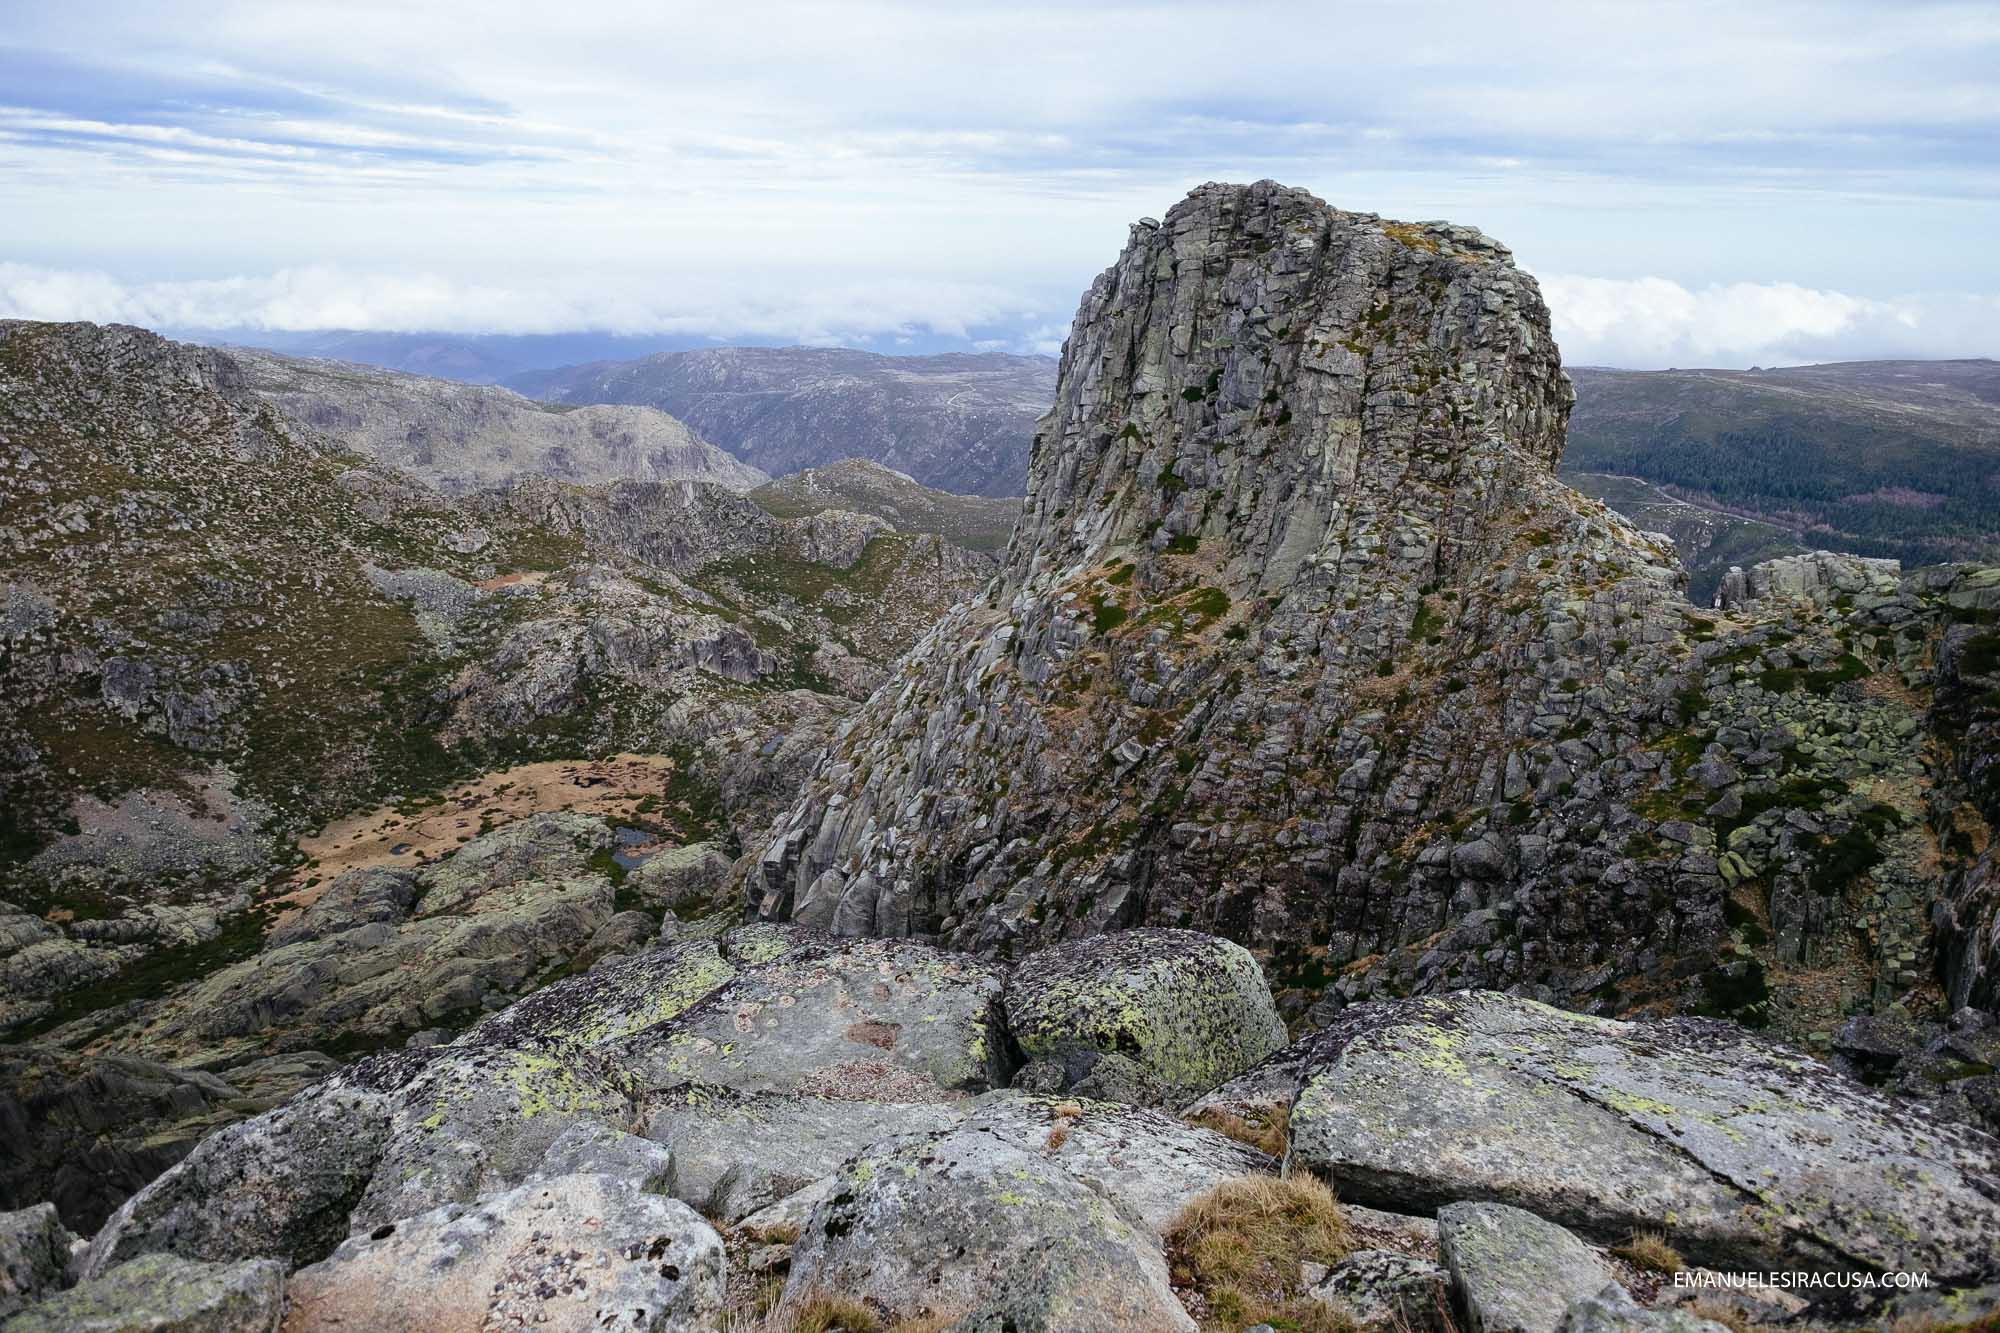 Cantaro Magro, one of the most iconic rock formations in Serra da Estrela